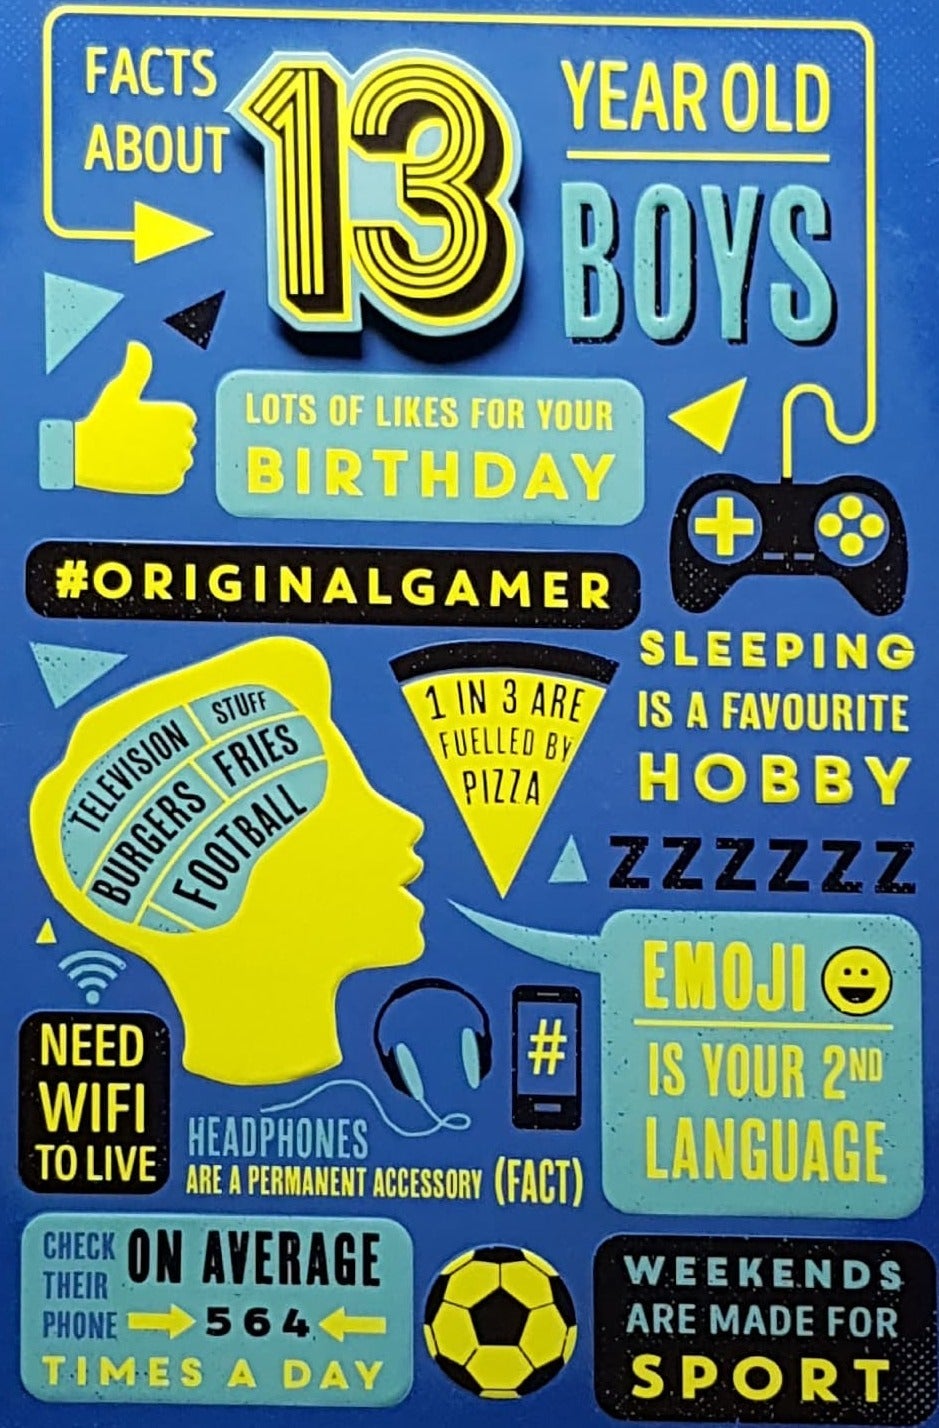 Age 13 Birthday Card - Facts About 13 Year Old Boys - Card Gallery Online UK